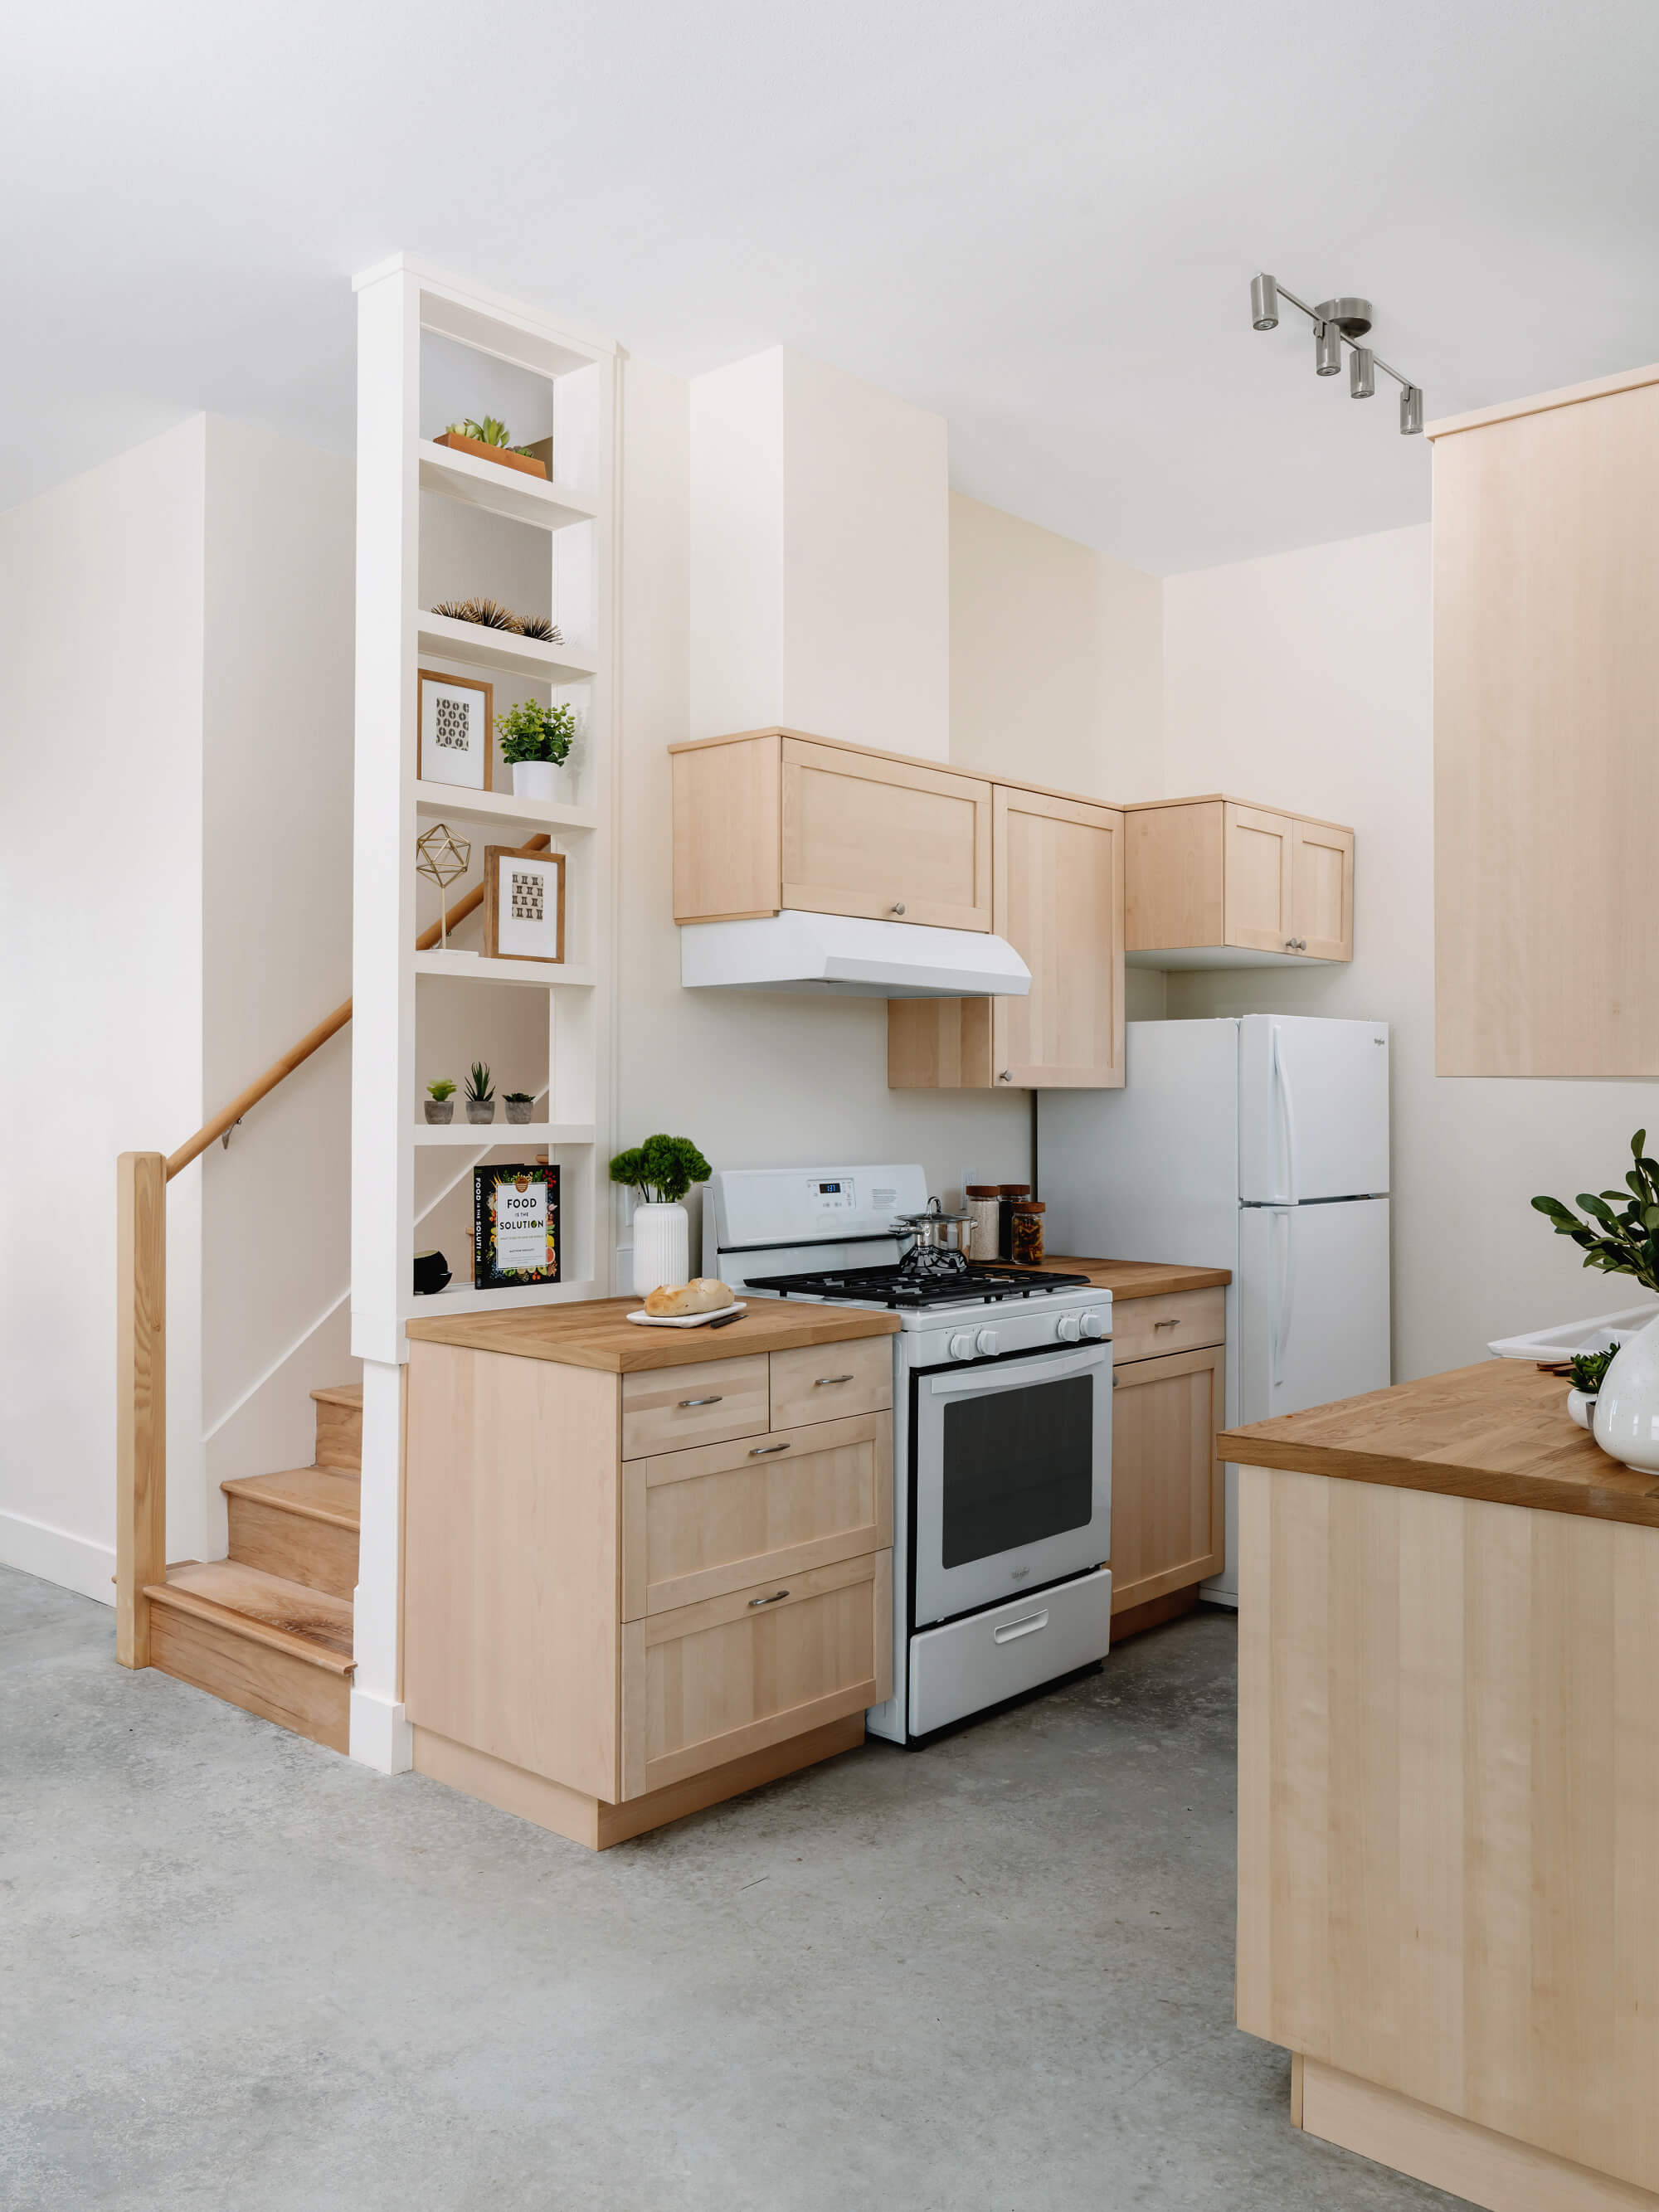 Interior photo of a kitchen with blond wood and white walls